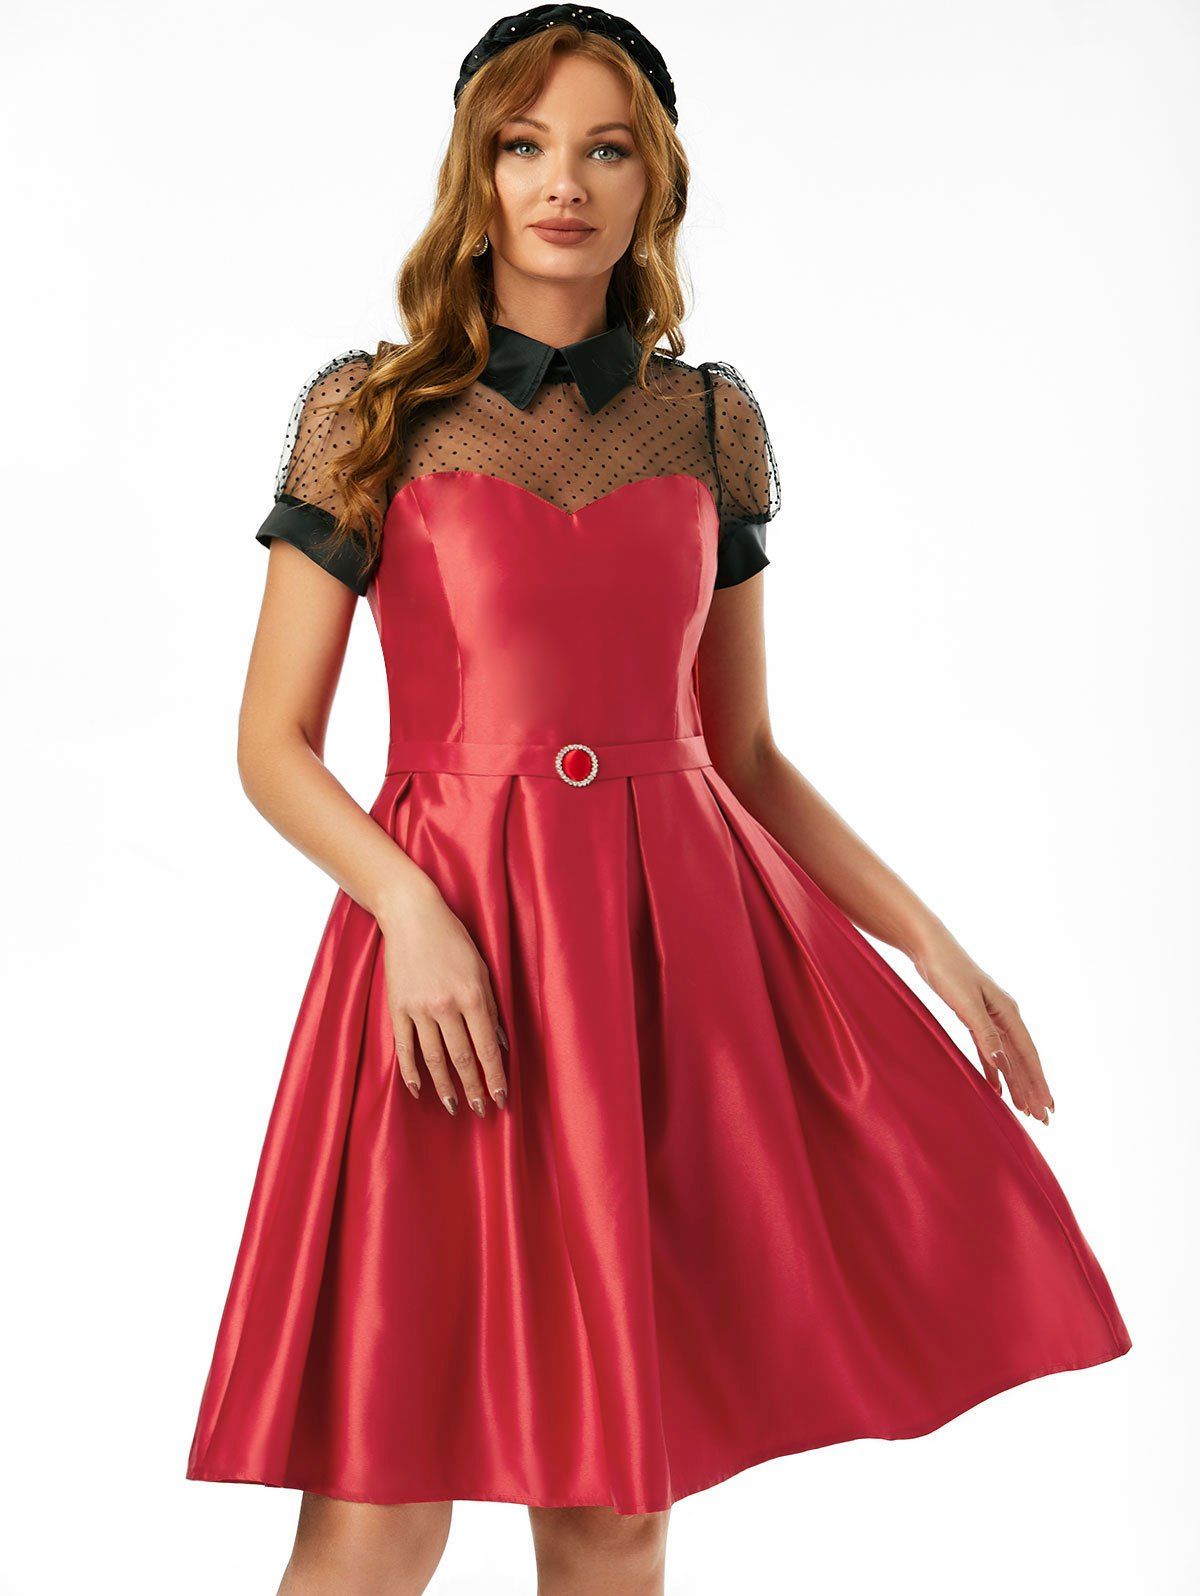 Mesh Insert Belted Prom Dress - RED 2XL